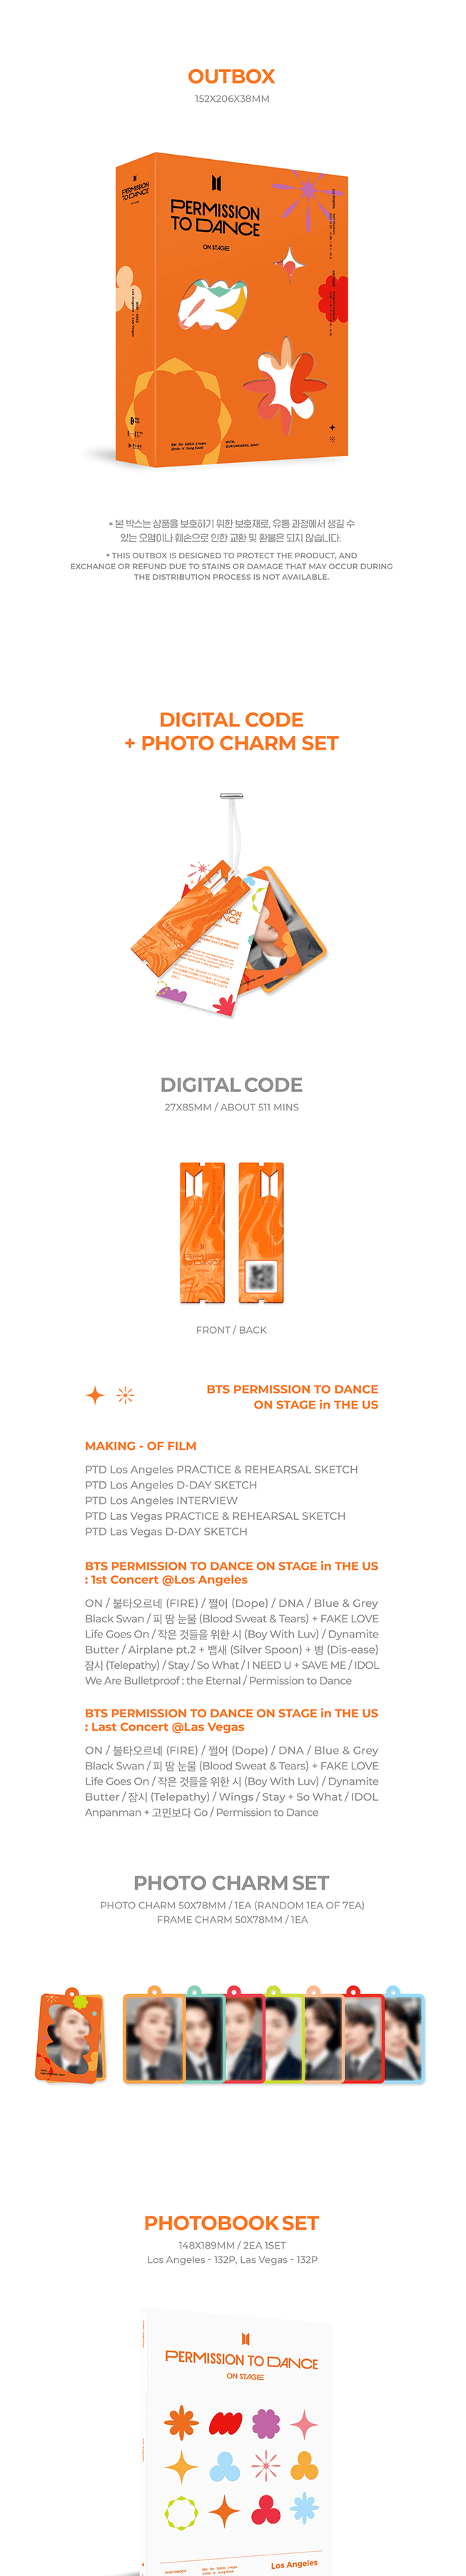 BTS PERMISSION TO DANCE ON STAGE IN THE US DIGITAL CODE PHOTOBOOK 